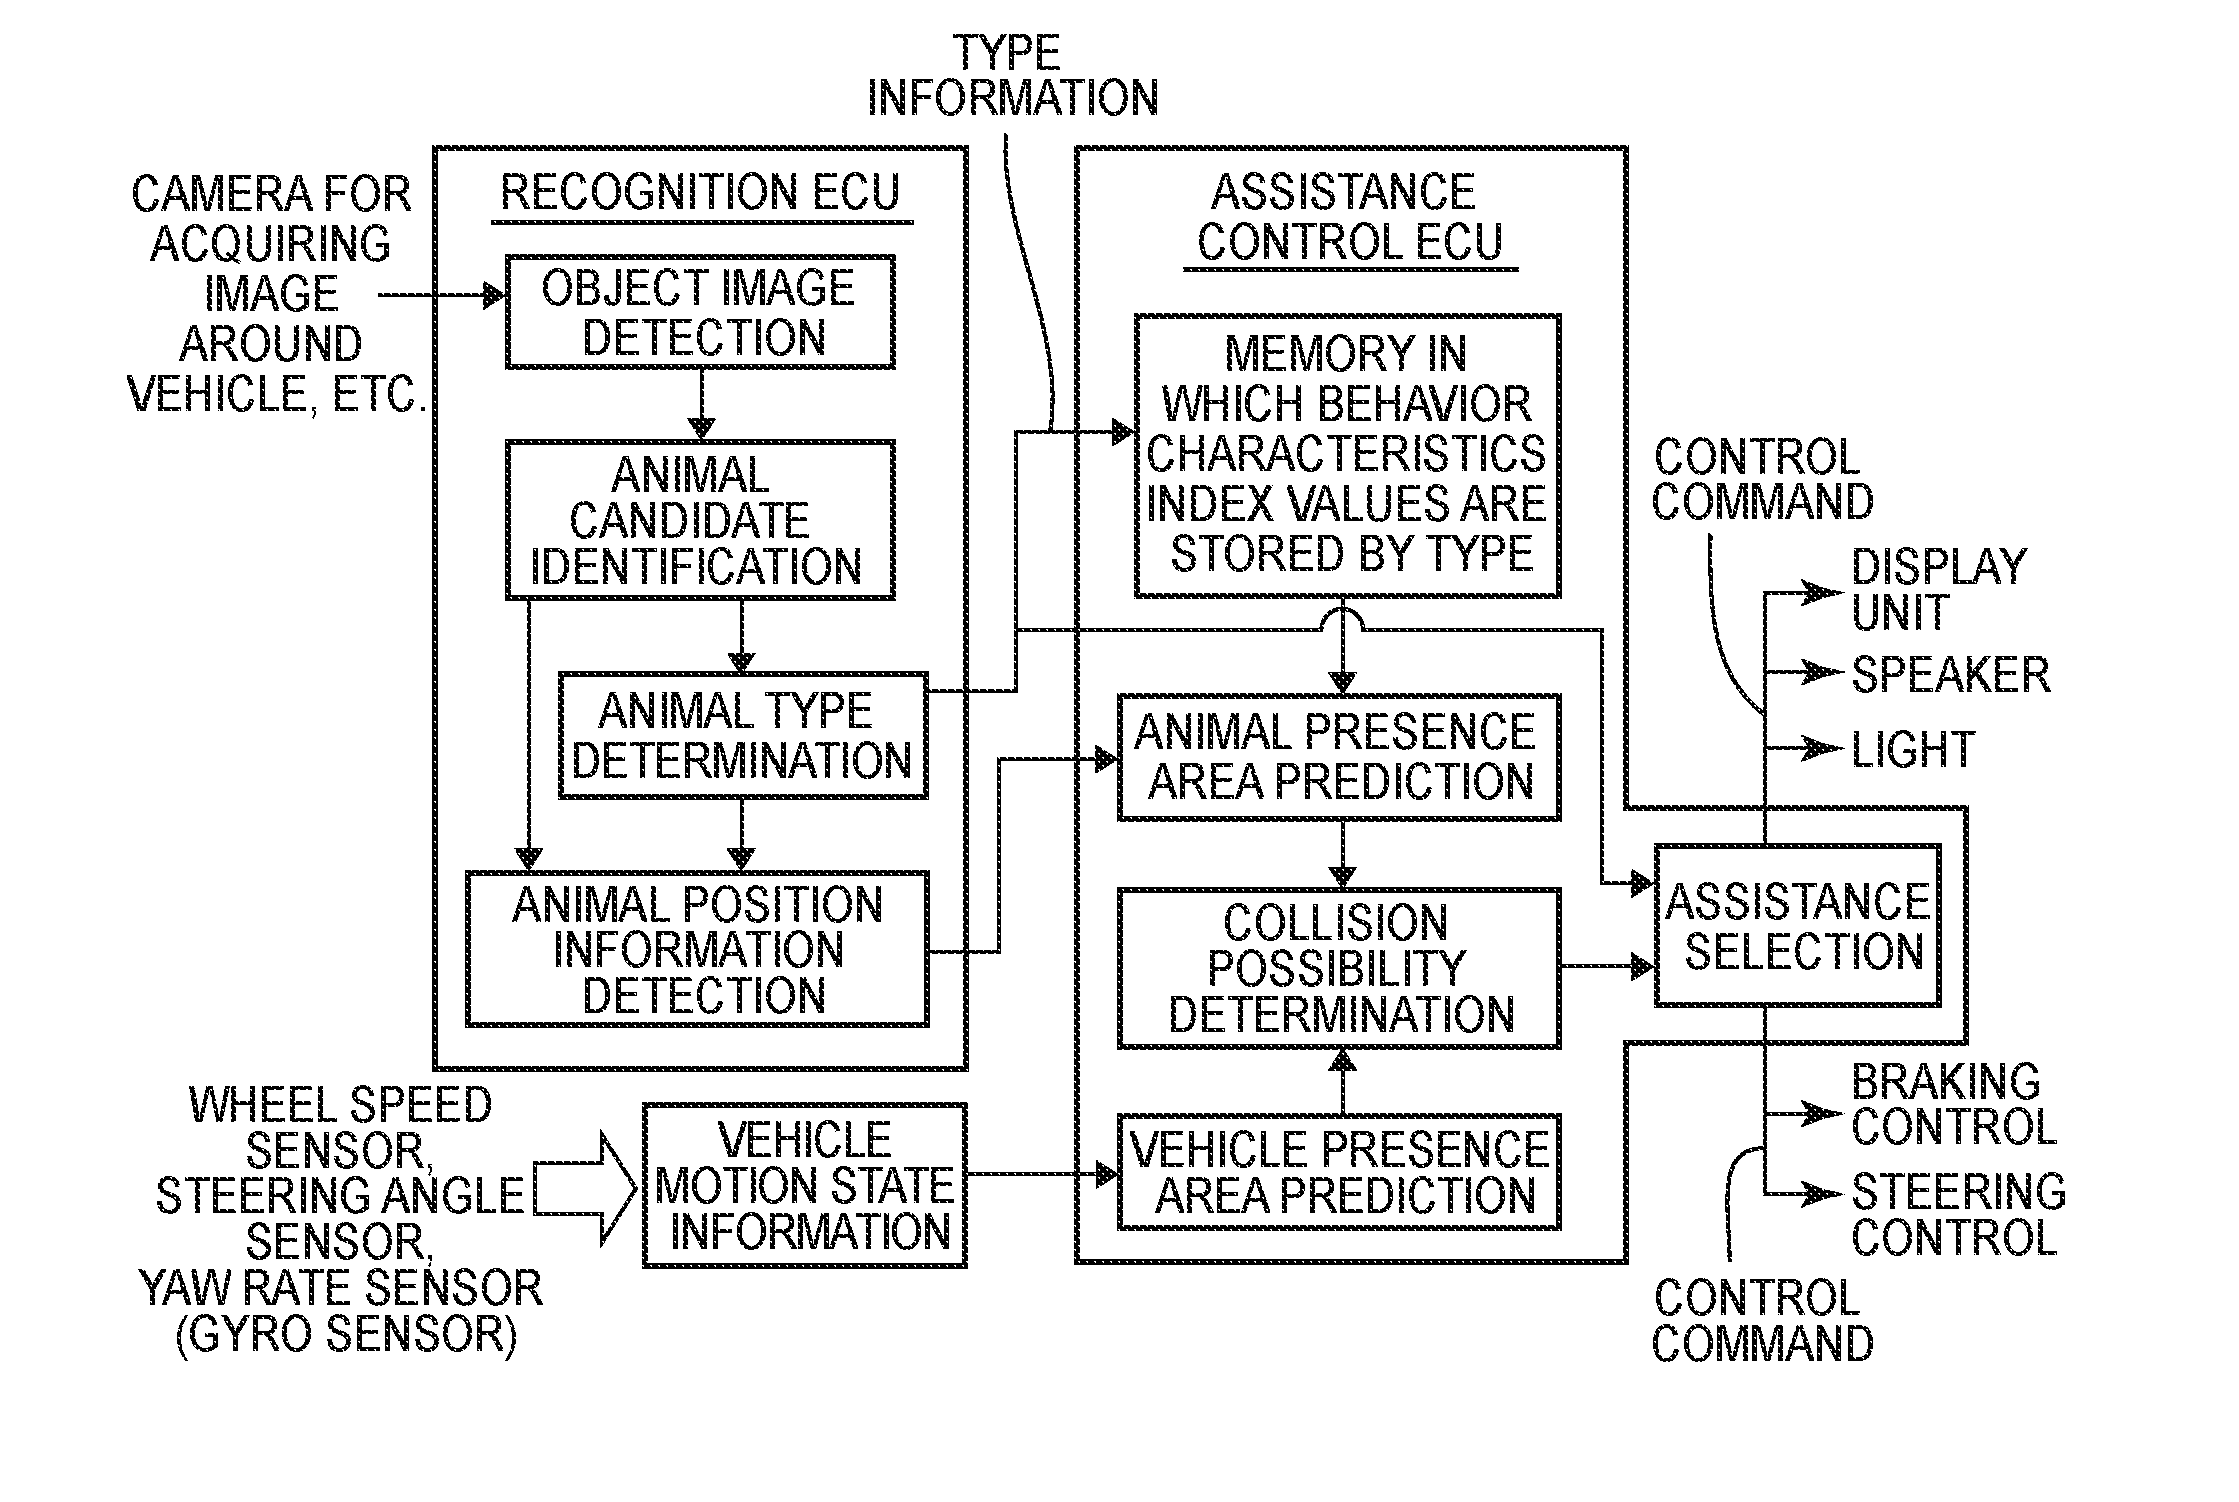 Collision avoidance assistance device for a vehicle